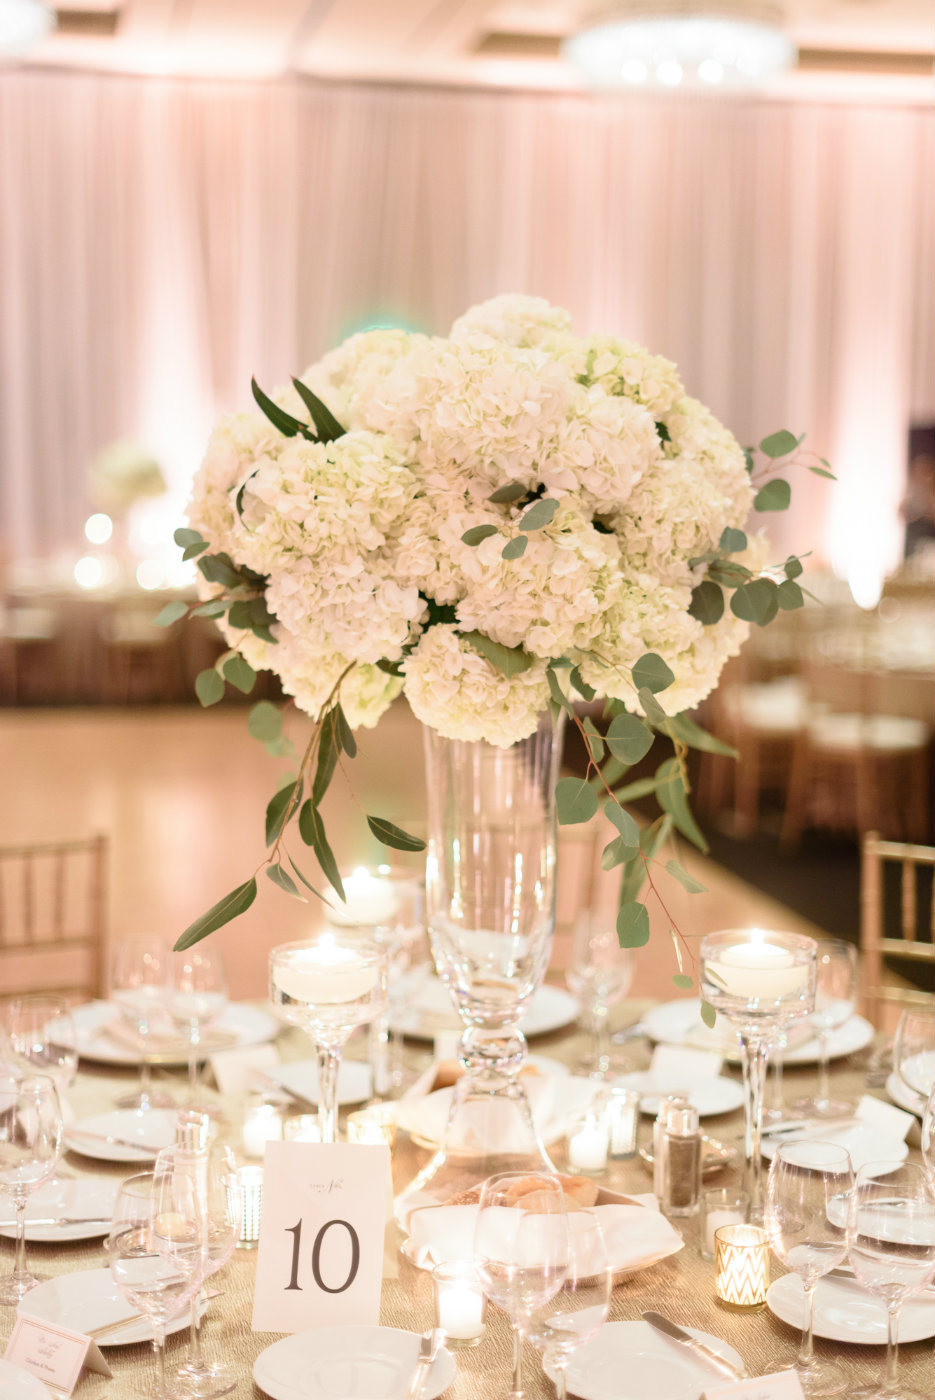 All white hydrangea with eucalyptus atop a tall glass vase is a simple and elegant winter wedding reception centerpiece.